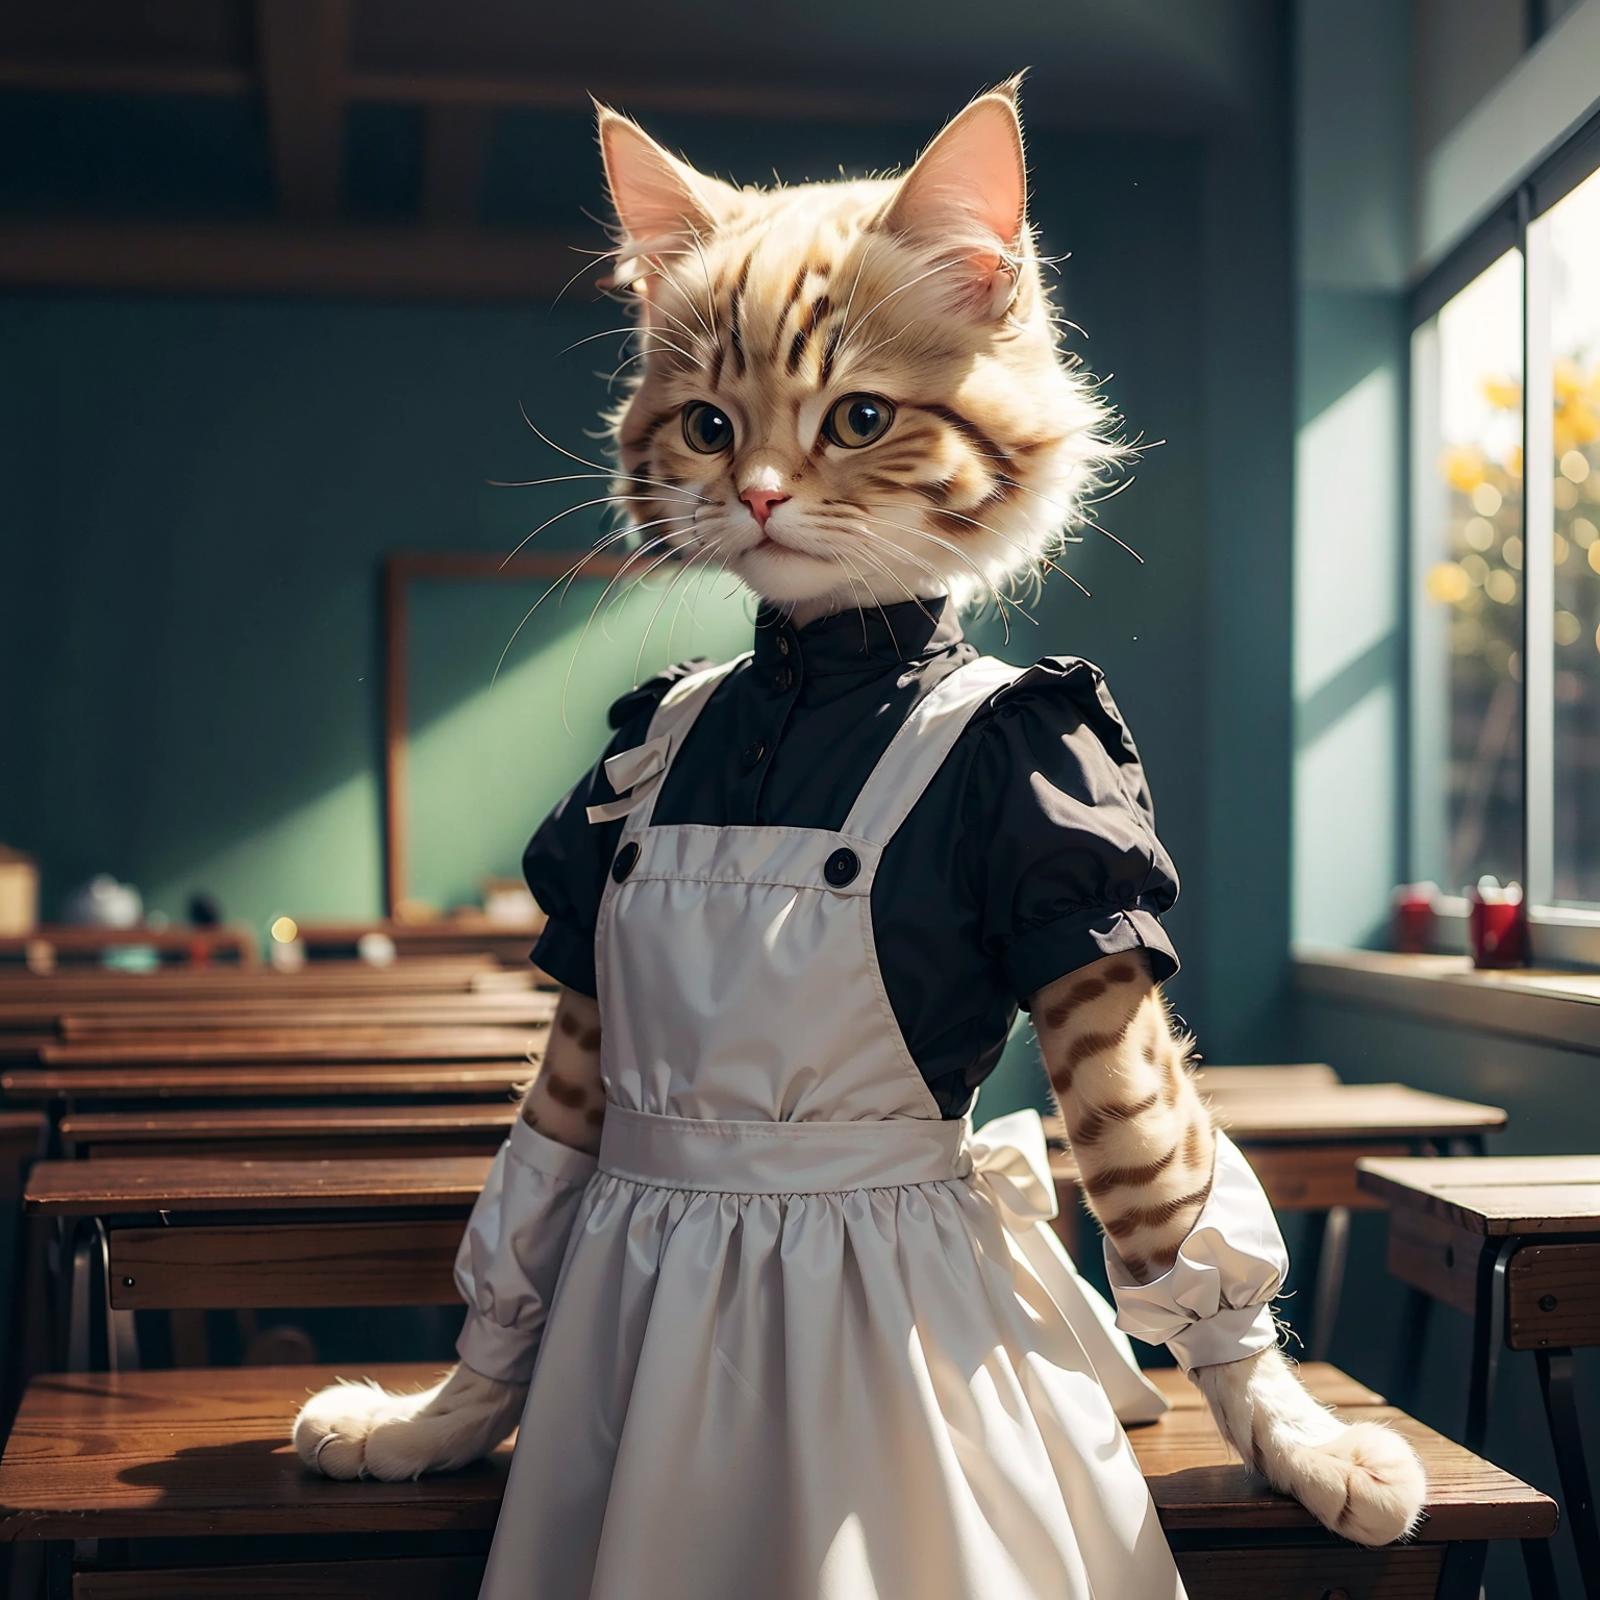 A cat dressed in a maid's outfit sits on a wooden table.